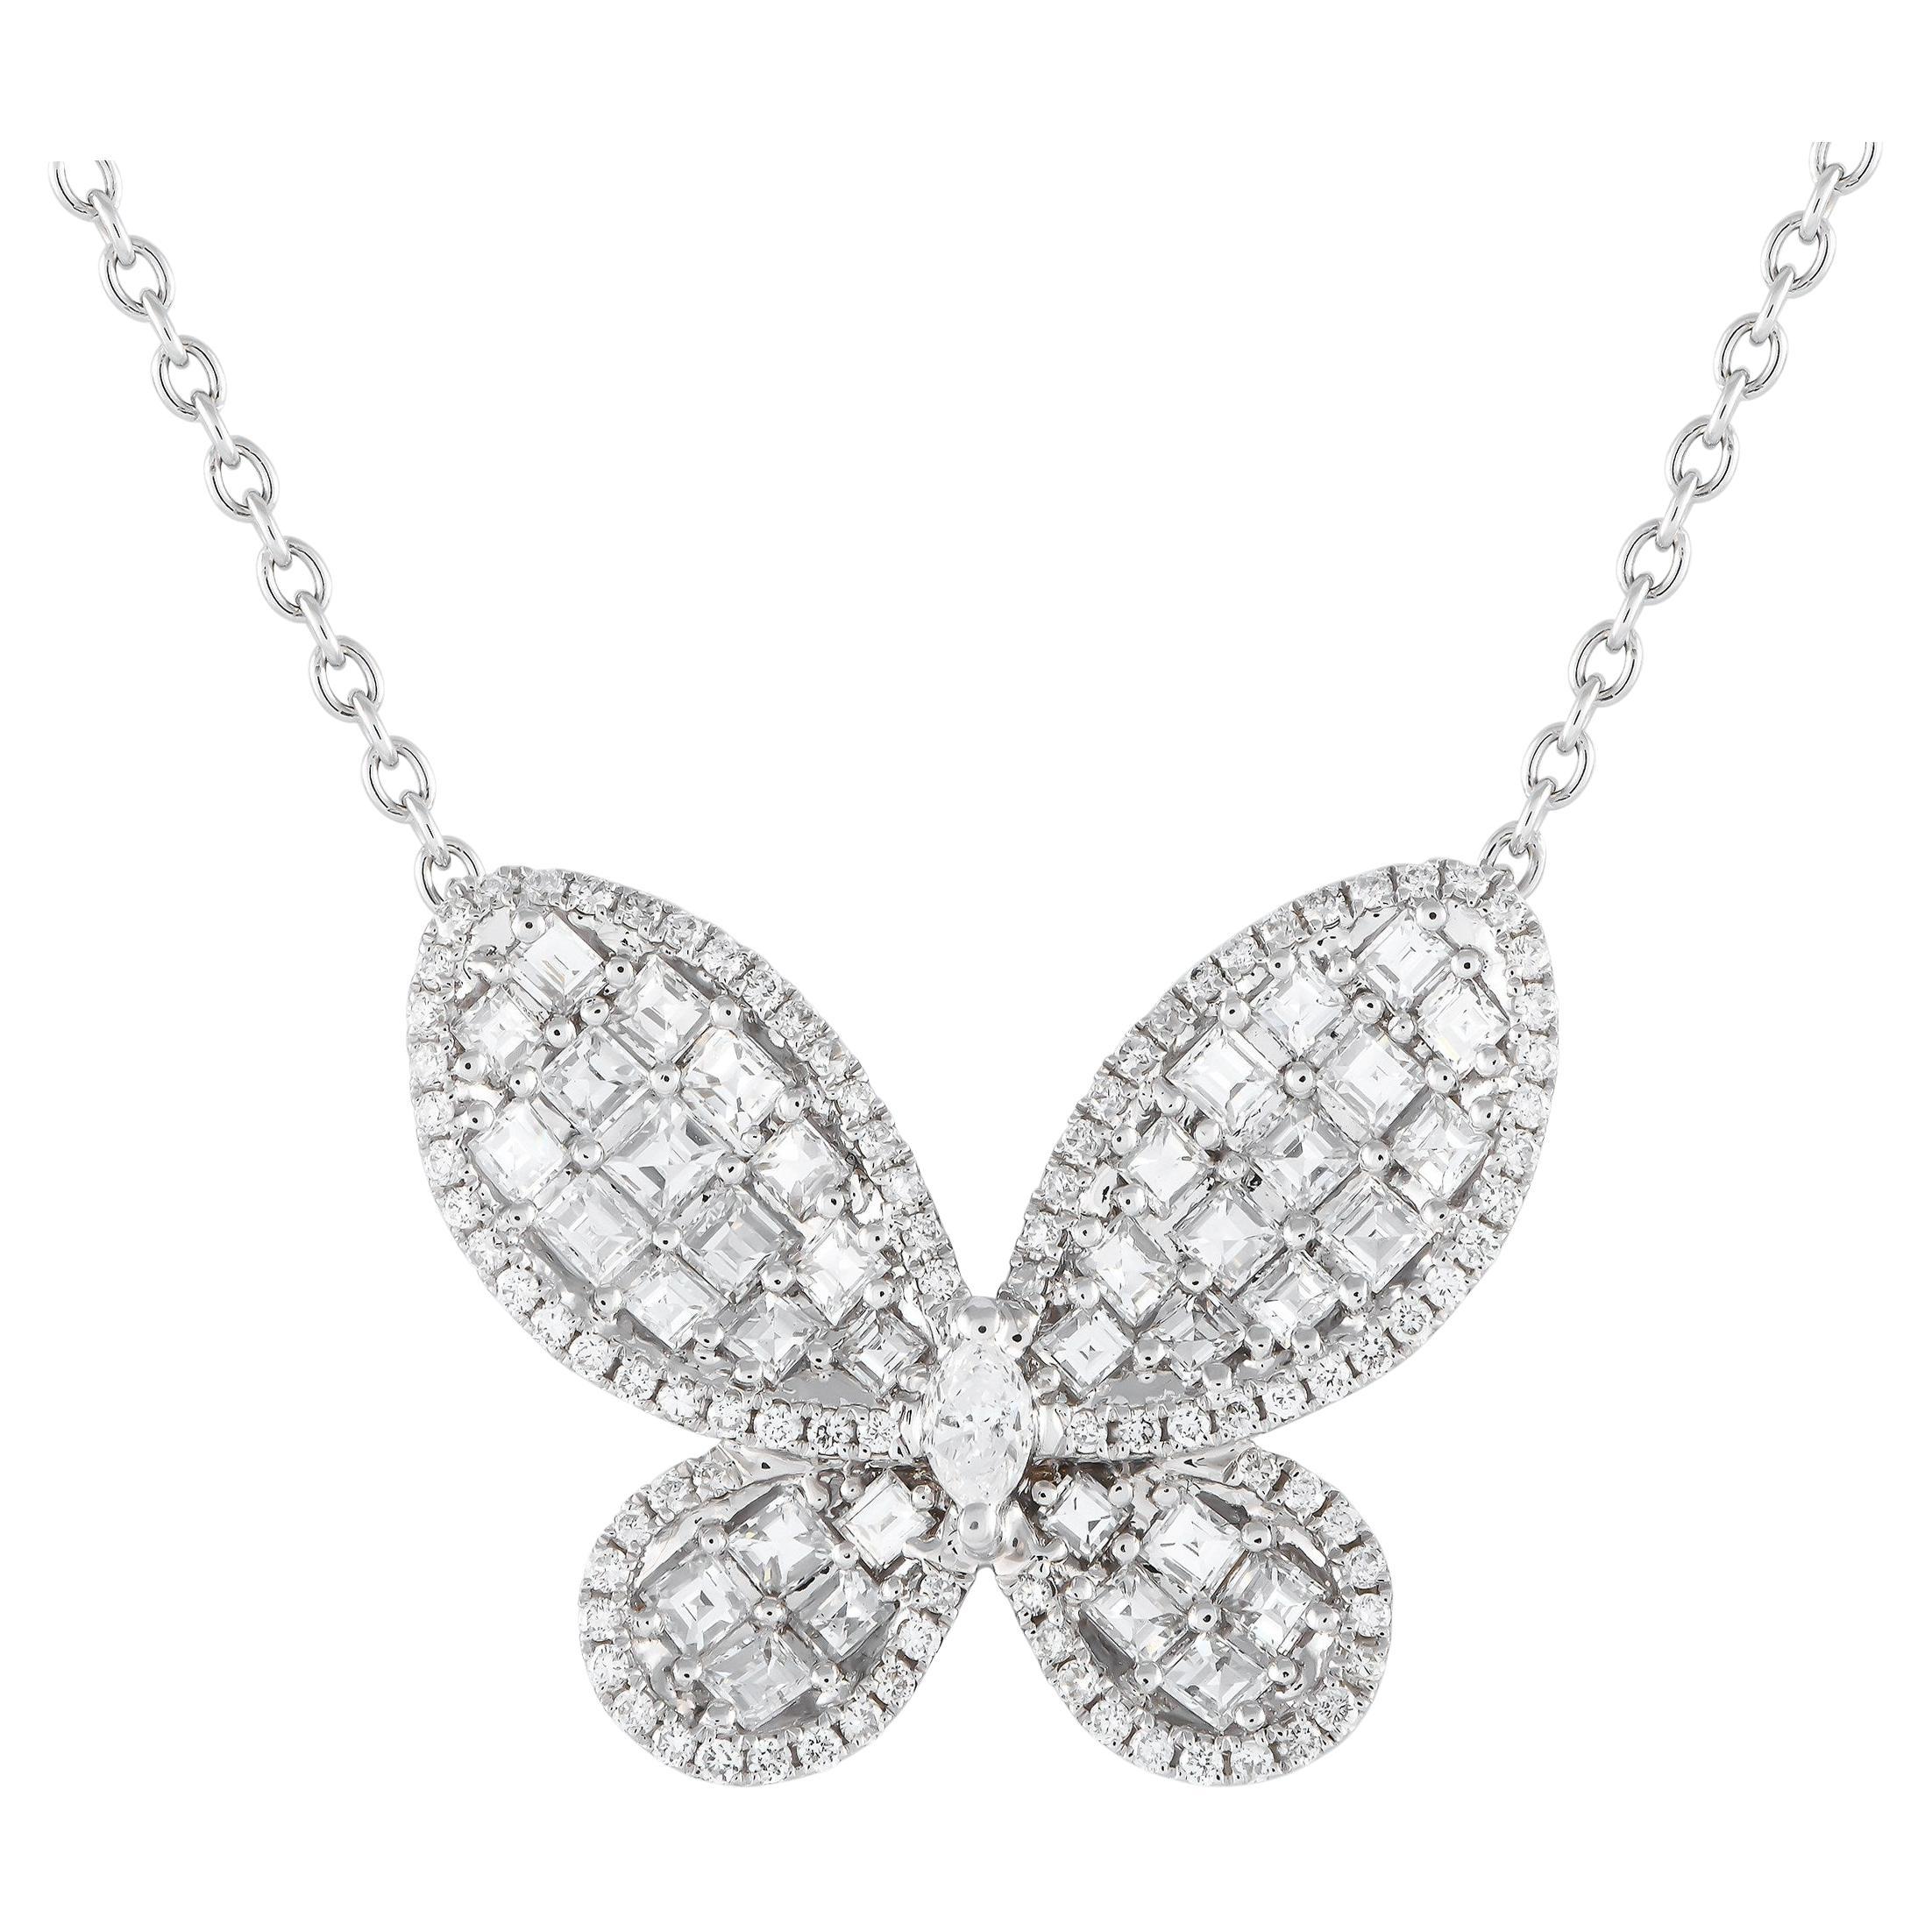 LB Exclusive 18K White Gold 2.0ct Diamond Butterfly Necklace For Sale